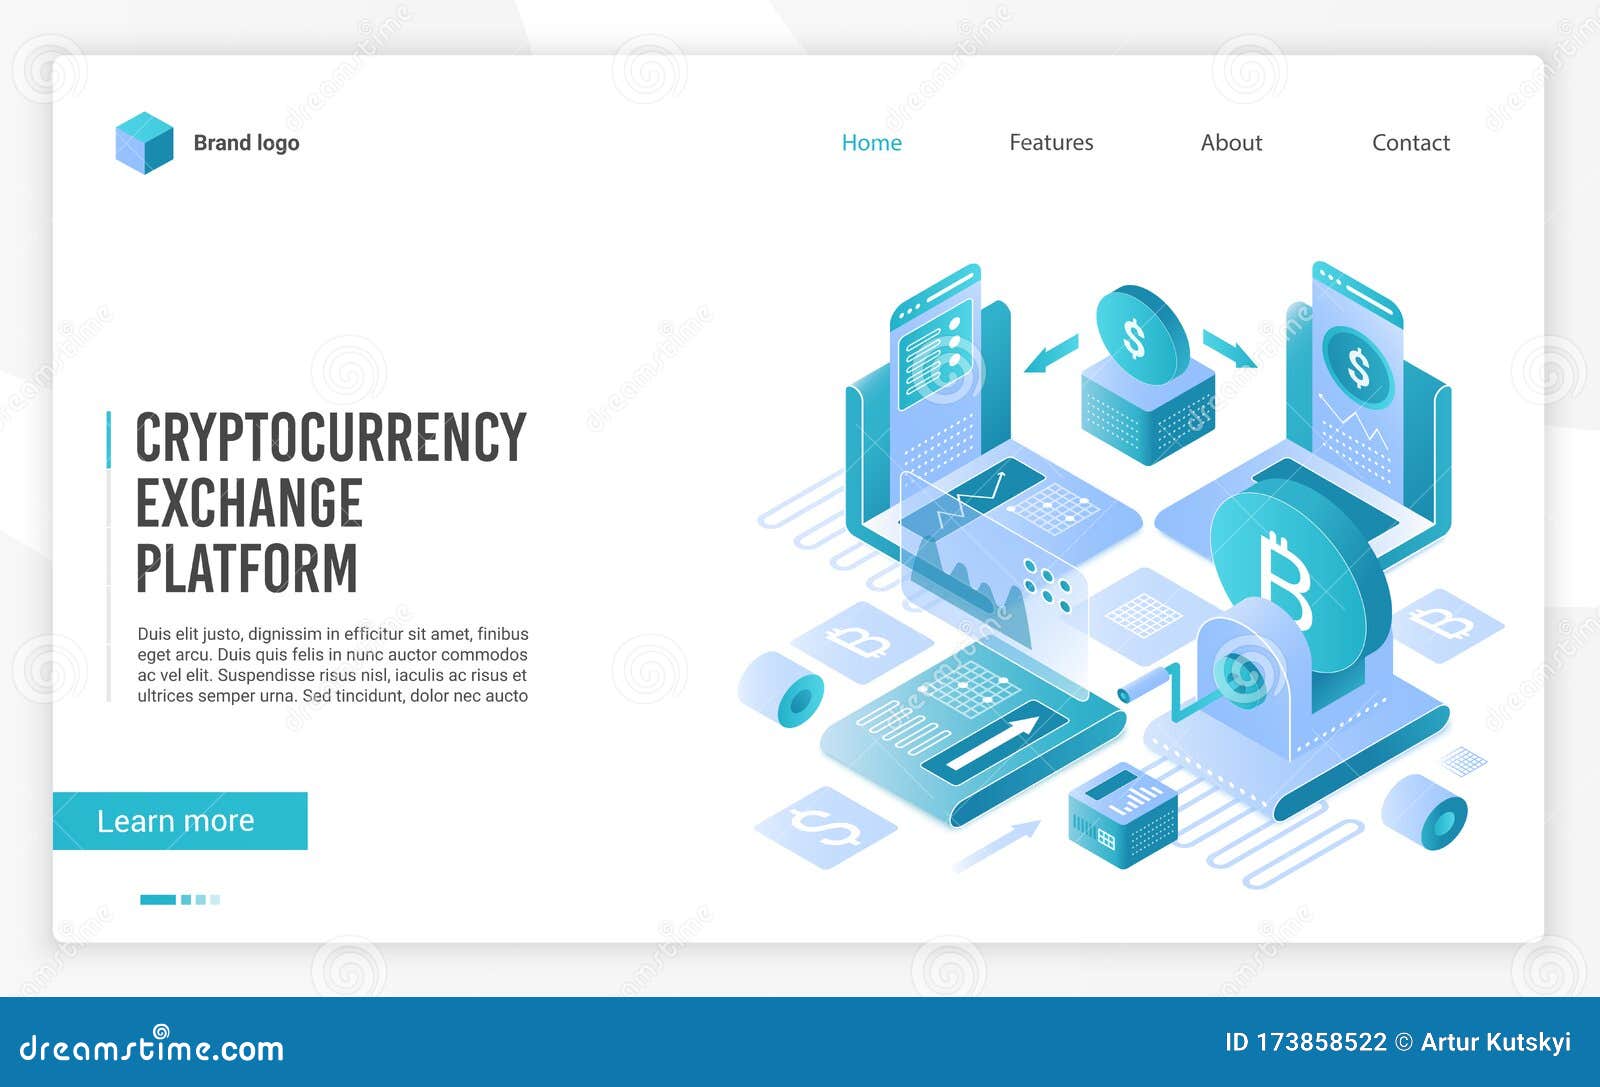 Cryptocurrency Marketplace For Exchange Of Bitcoin And ...